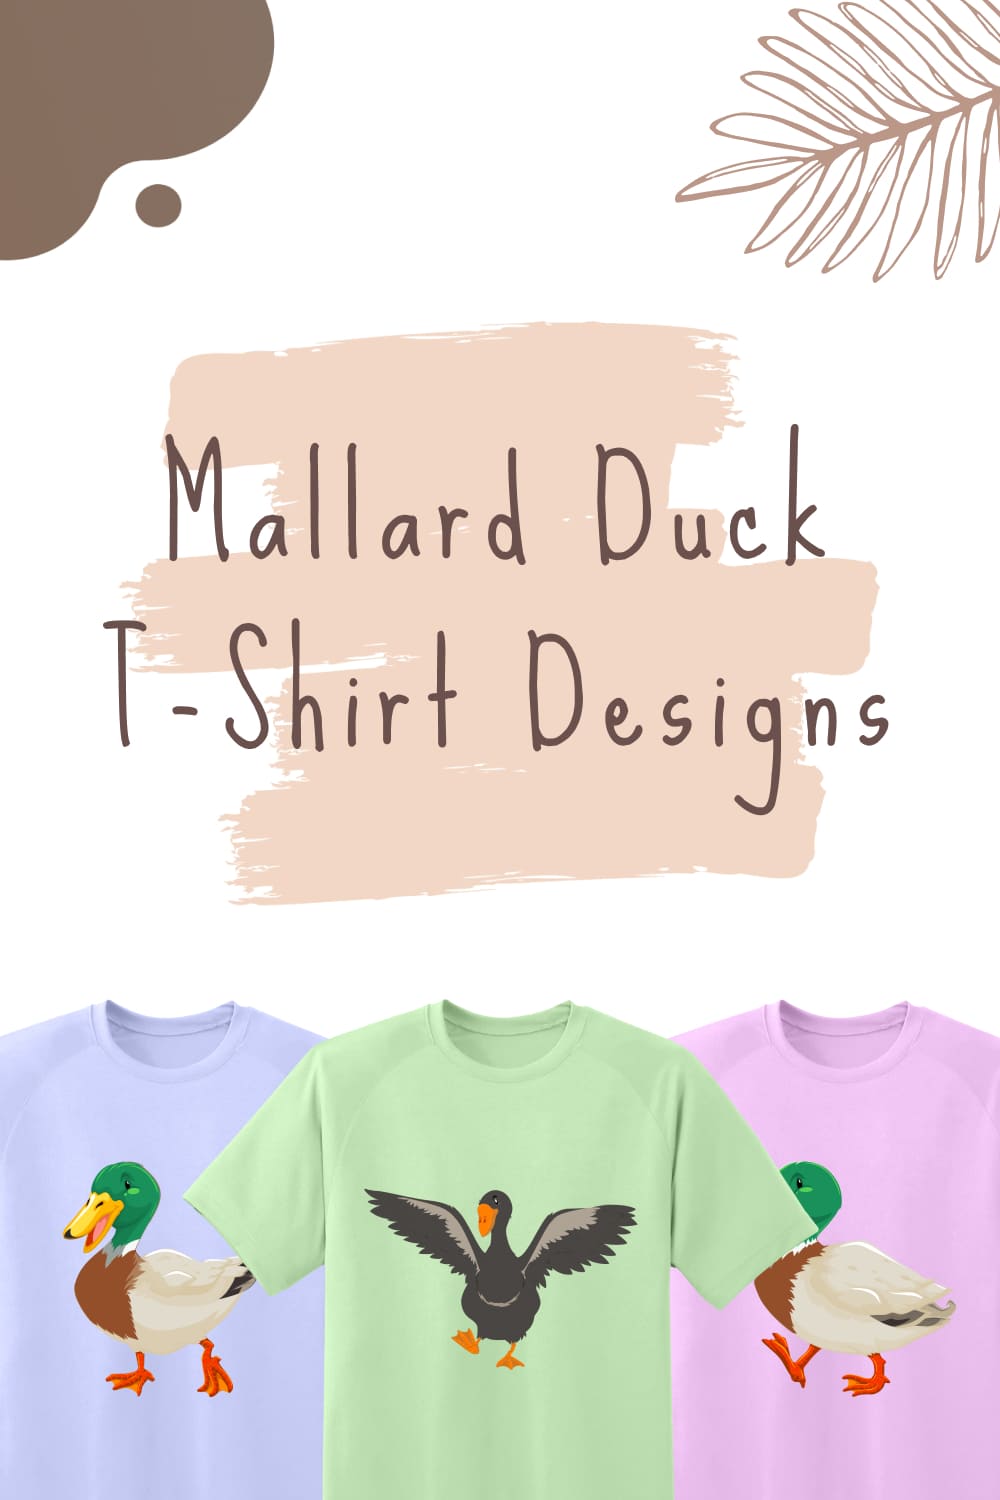 Set of t-shirt images with mallard duck colorful prints.